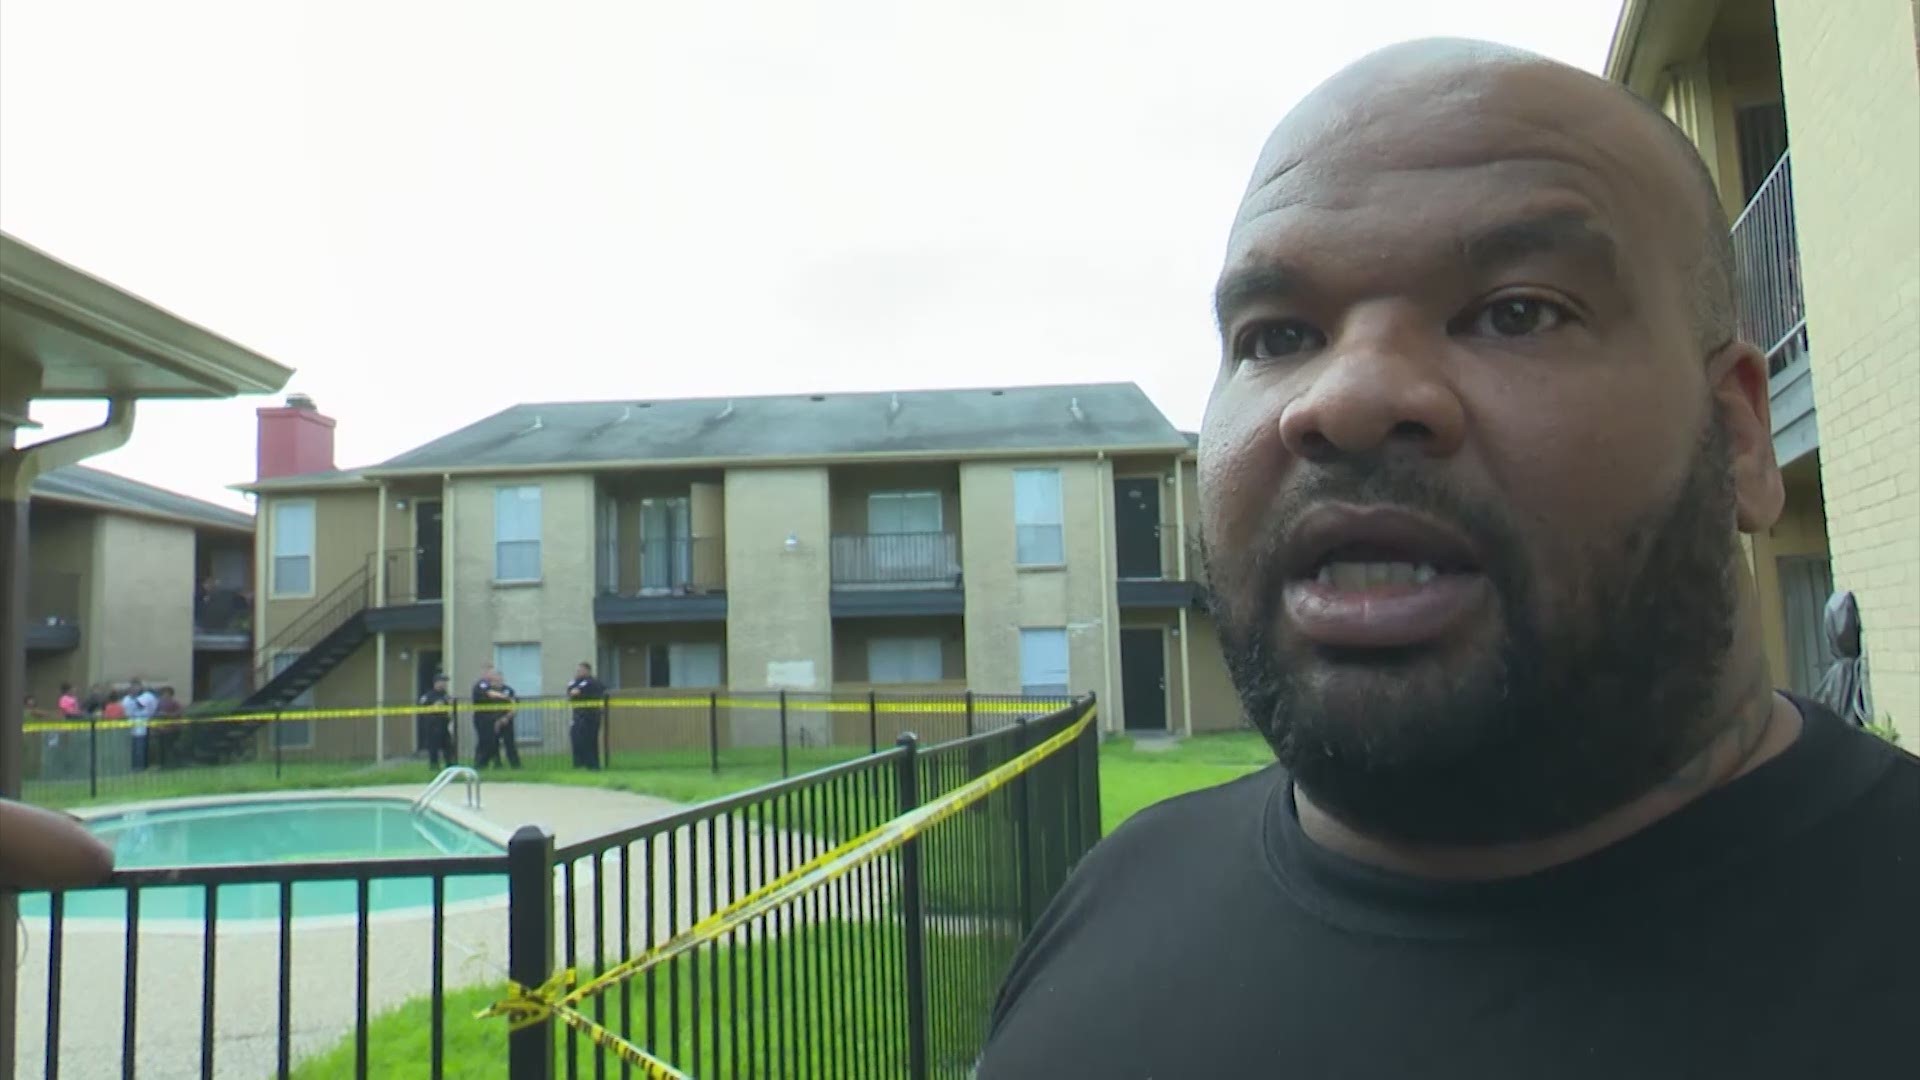 A 6-year-old boy has died after he was pulled from a pool at an apartment complex in Baytown.